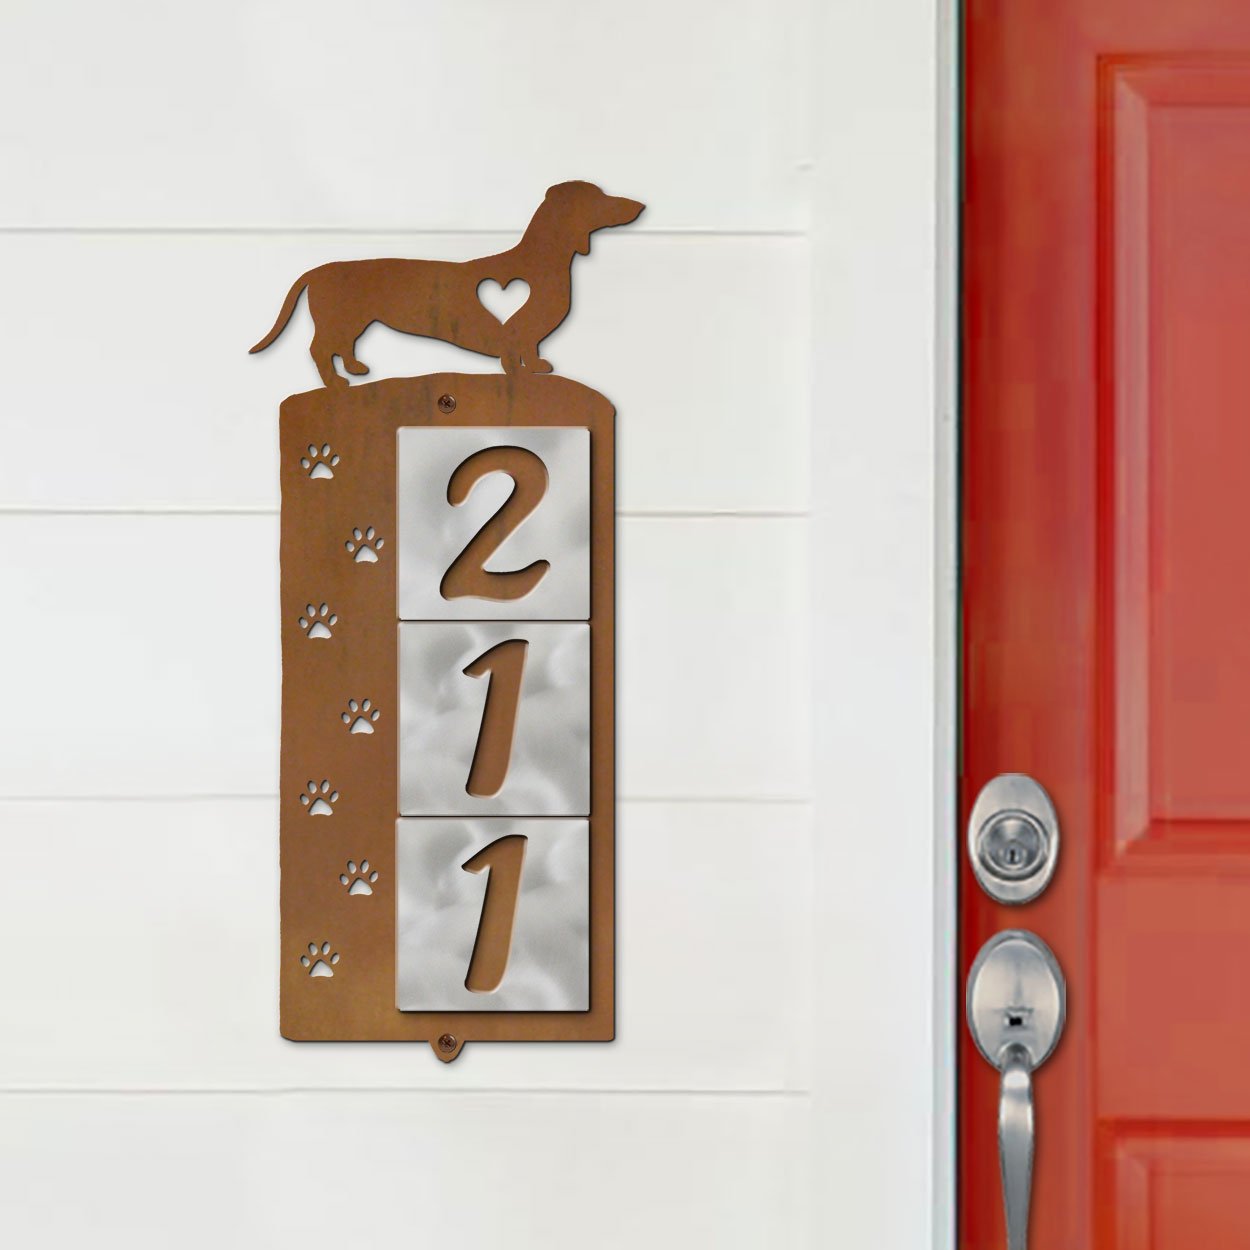 606183 - Dachshund Nose Prints 3-Digit Vertical Tile House Numbers